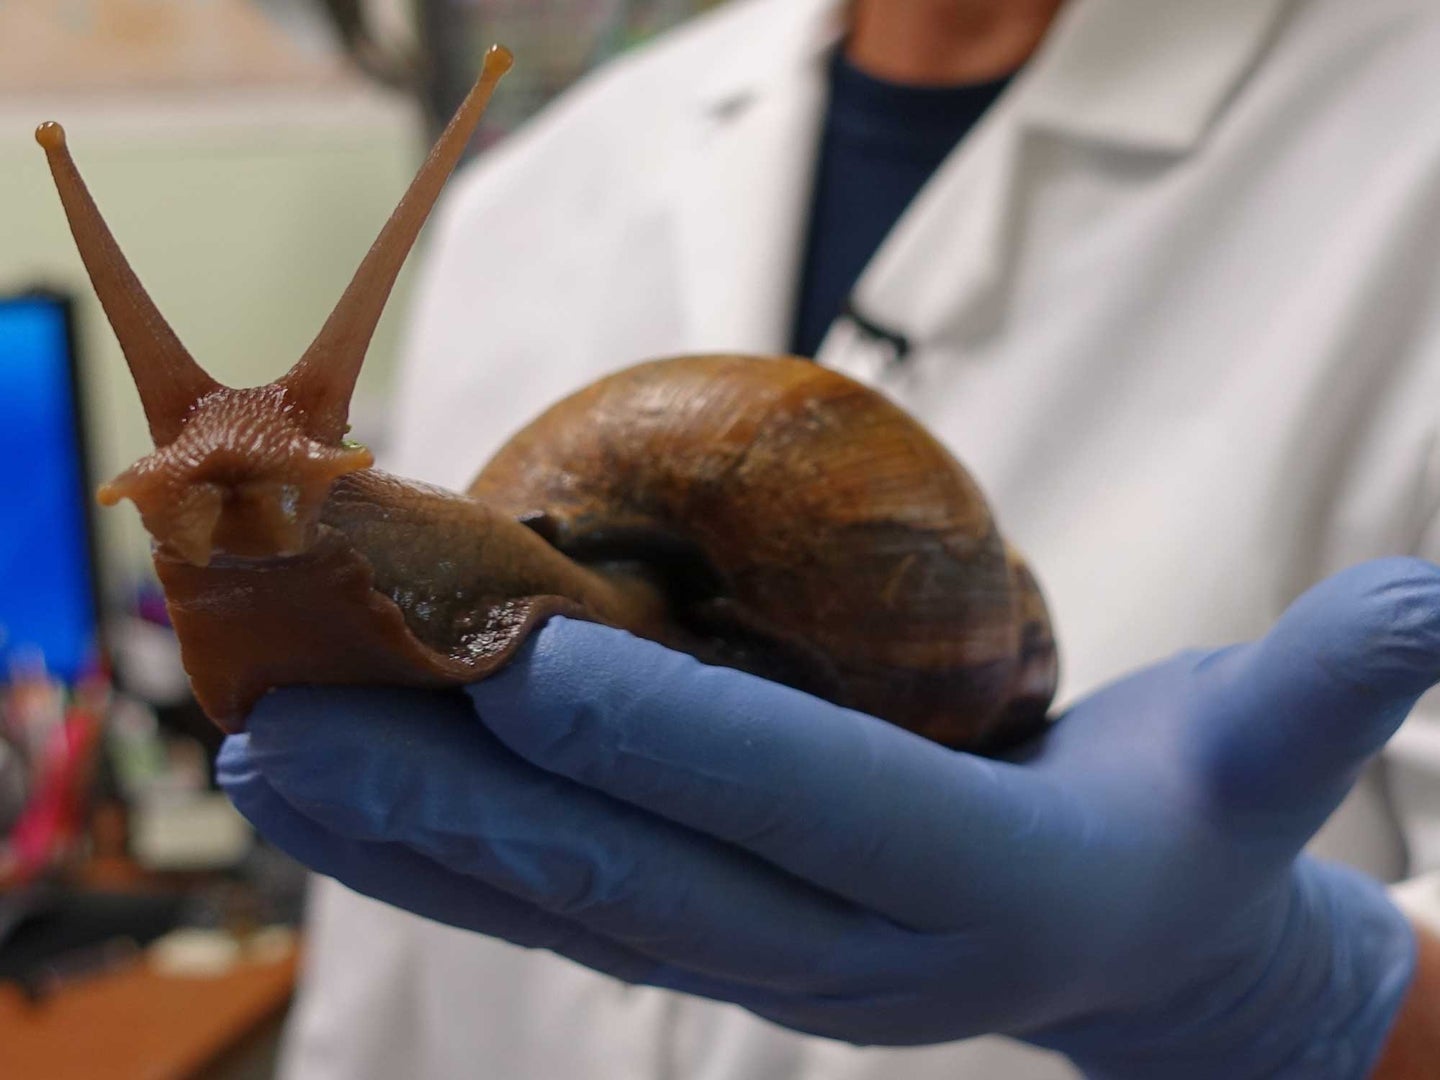 Officials are warning residents not to touch any of the snails without gloves.